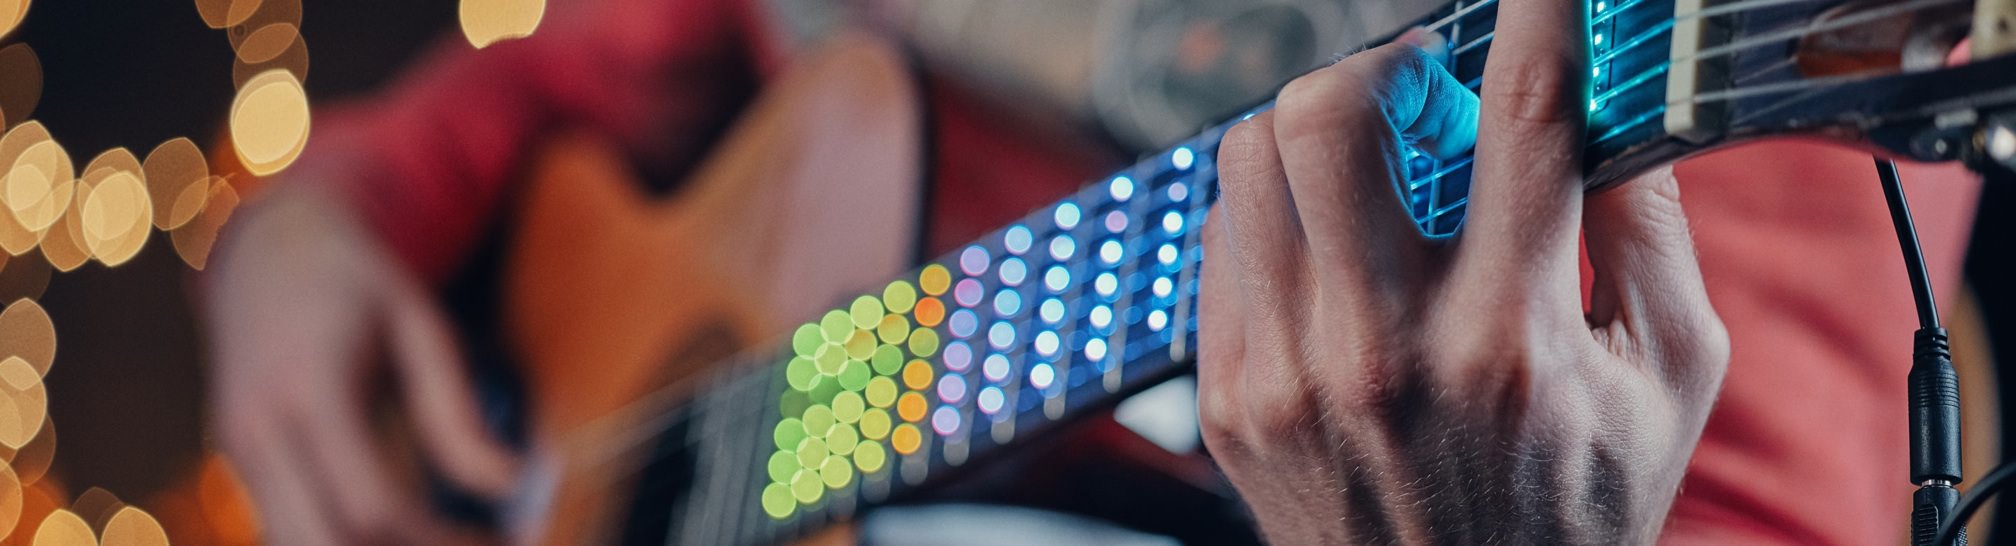 A full spectrum LED learning system for the guitar developed by Integra Sources